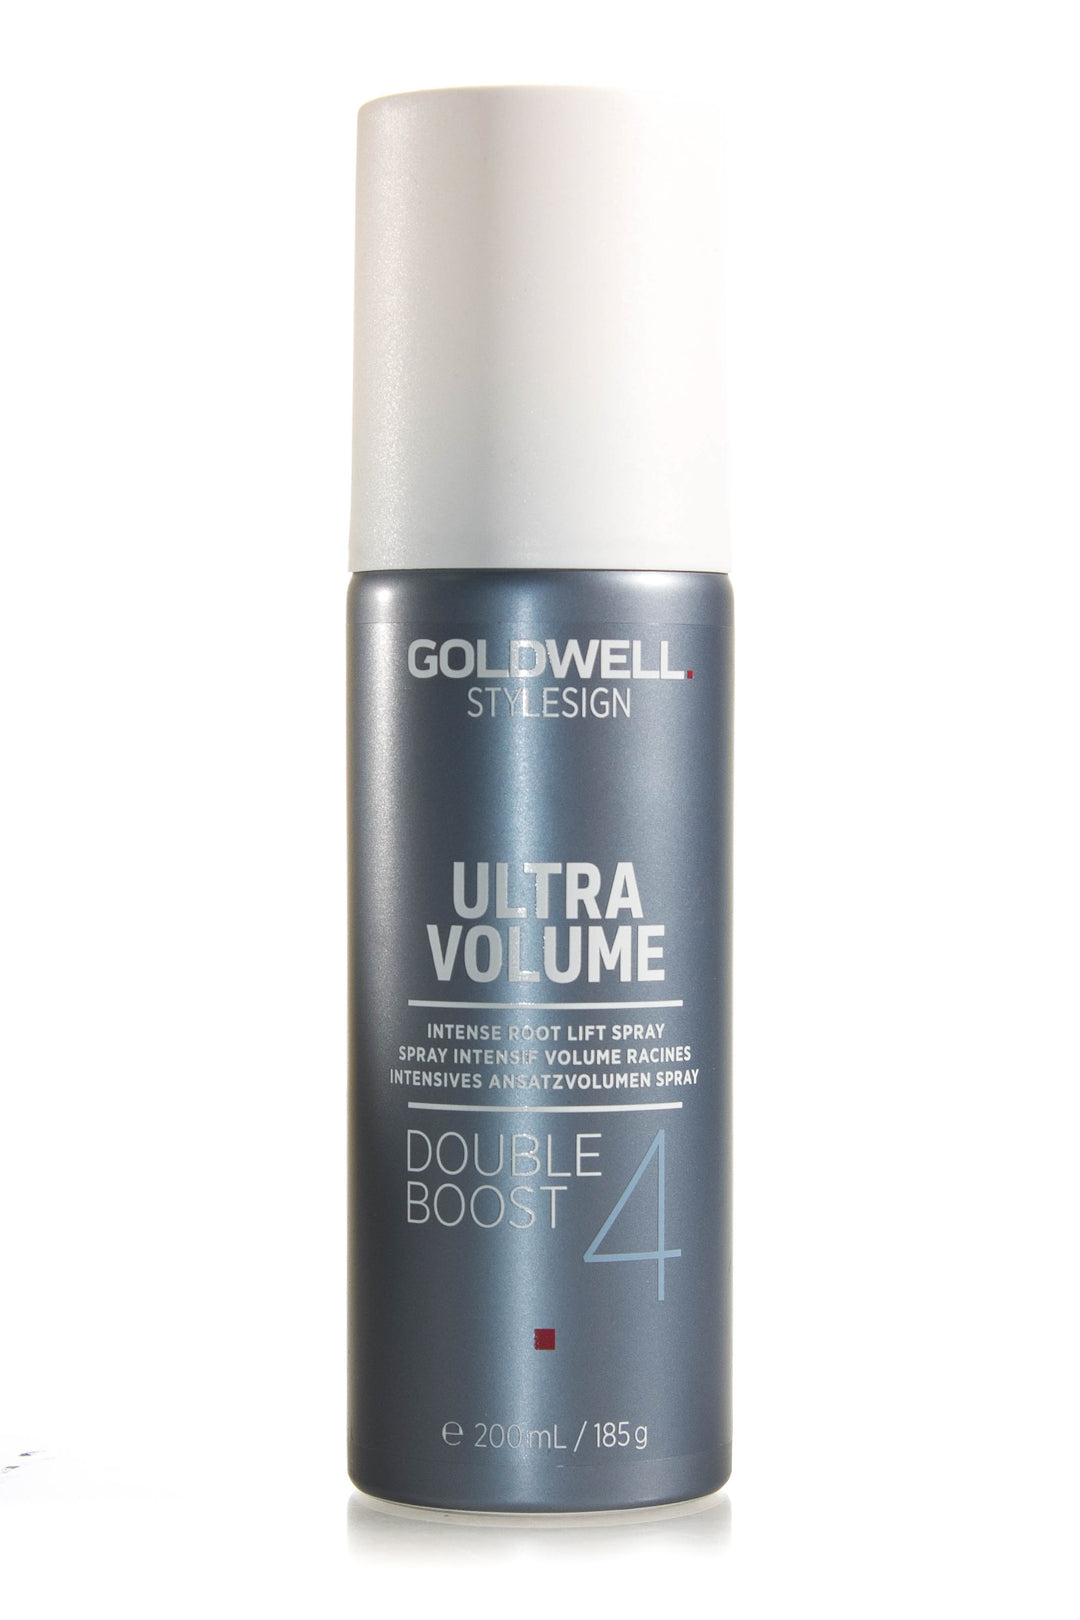 Product Image: Goldwell Ultra Volume Double Boost - 200ml